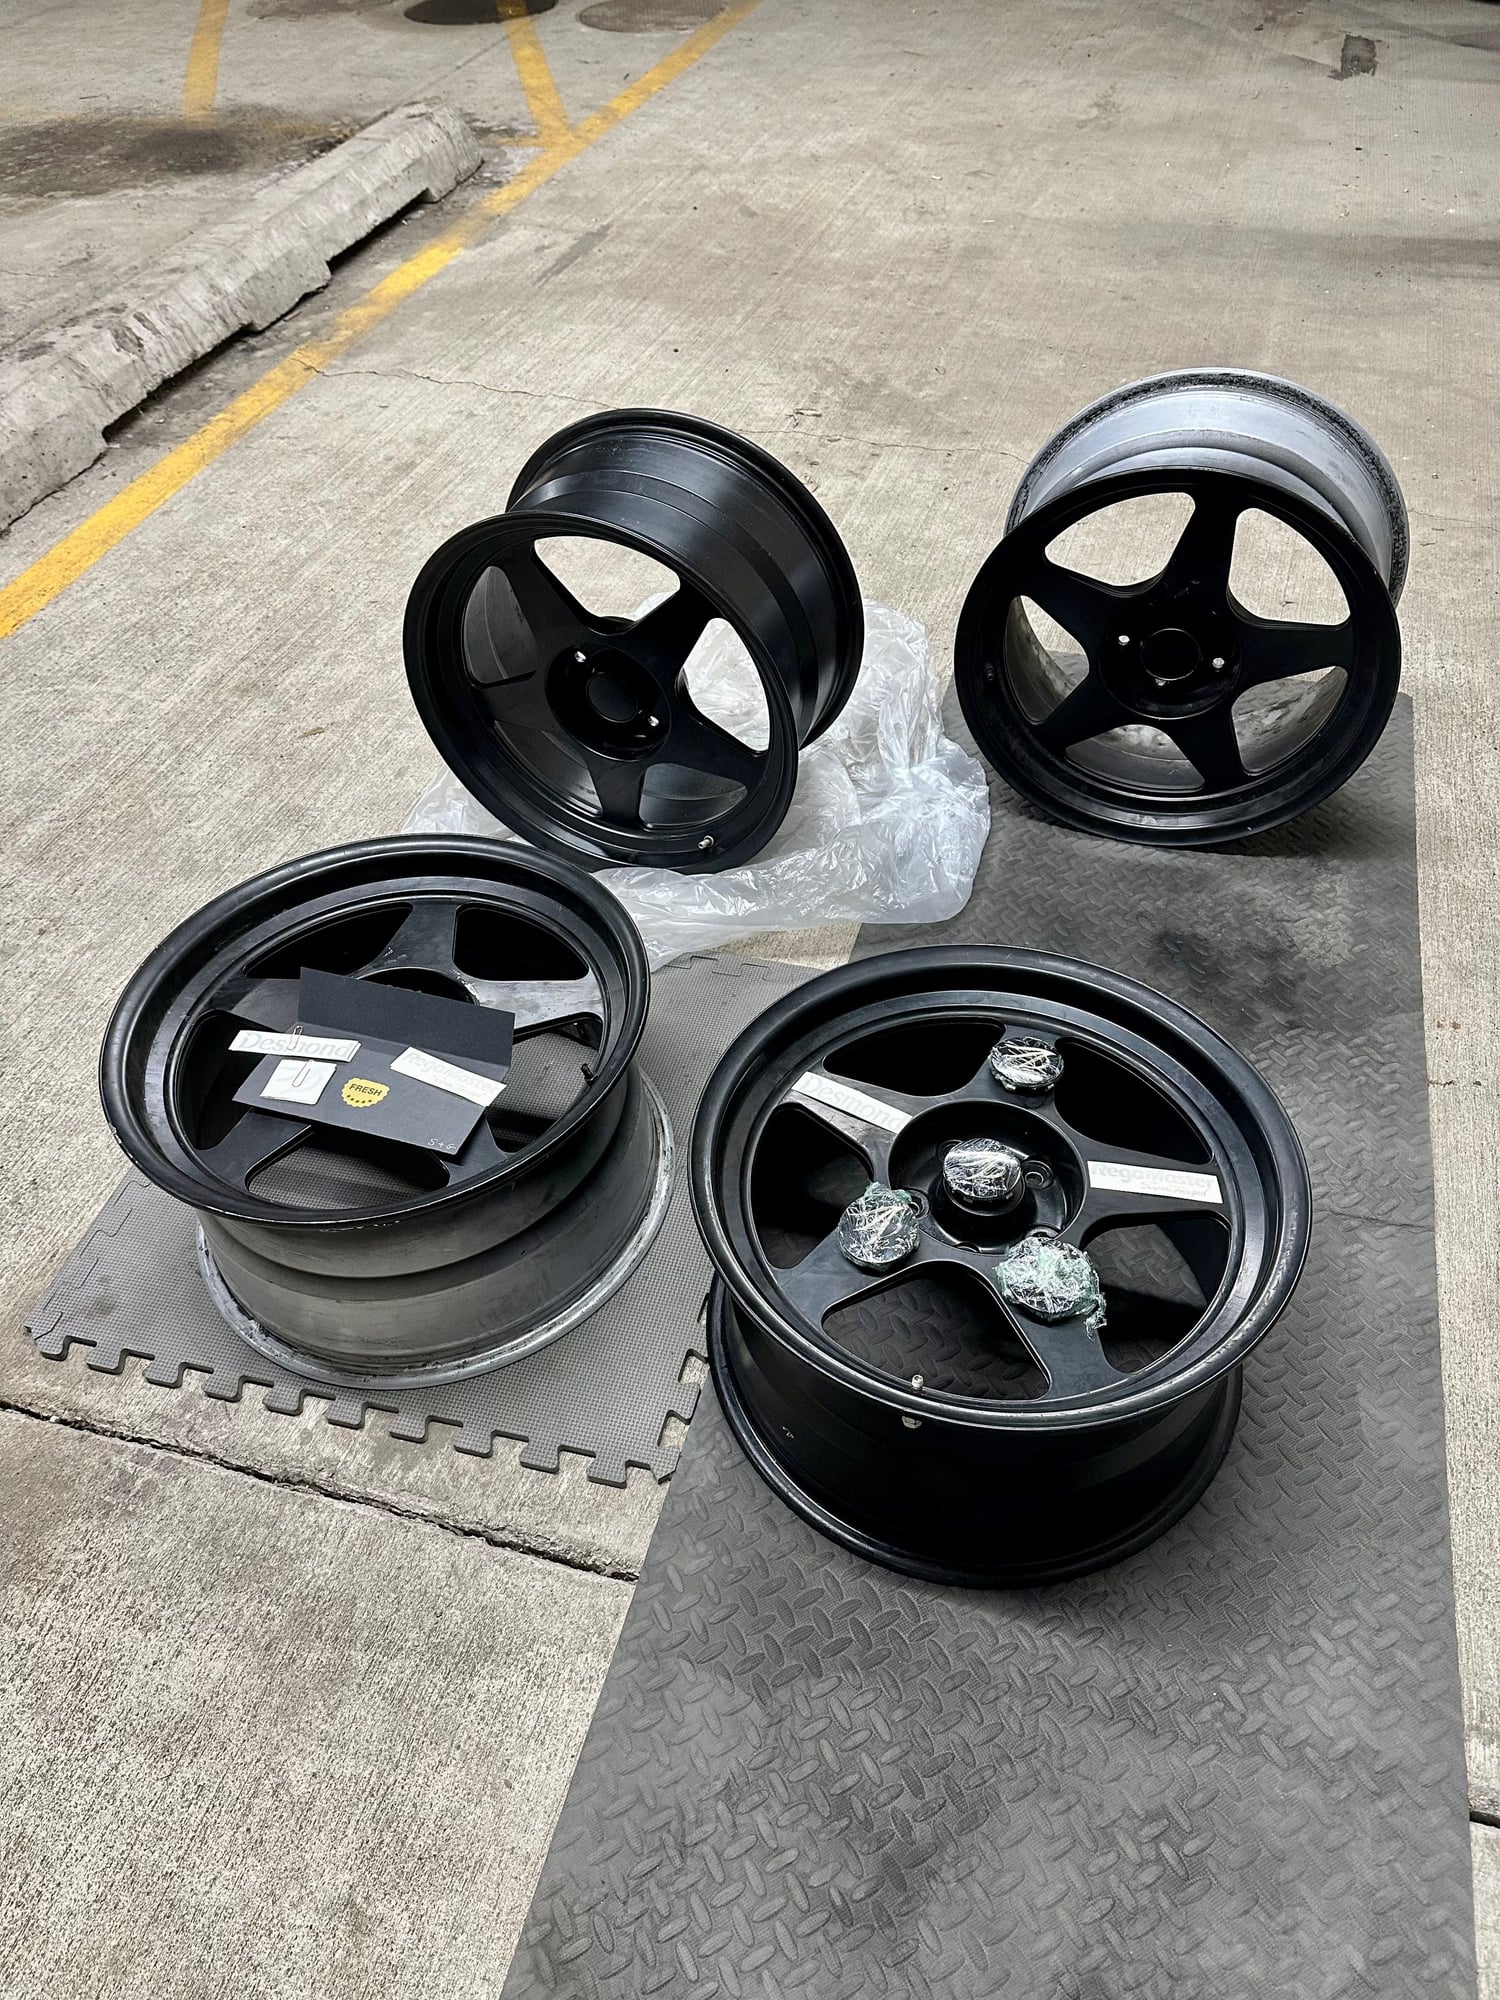 Wheels and Tires/Axles - 17x9 +38mm stock body spec Regamaster MPs - Used - All Years Any Make All Models - Chicago, IL 60647, United States